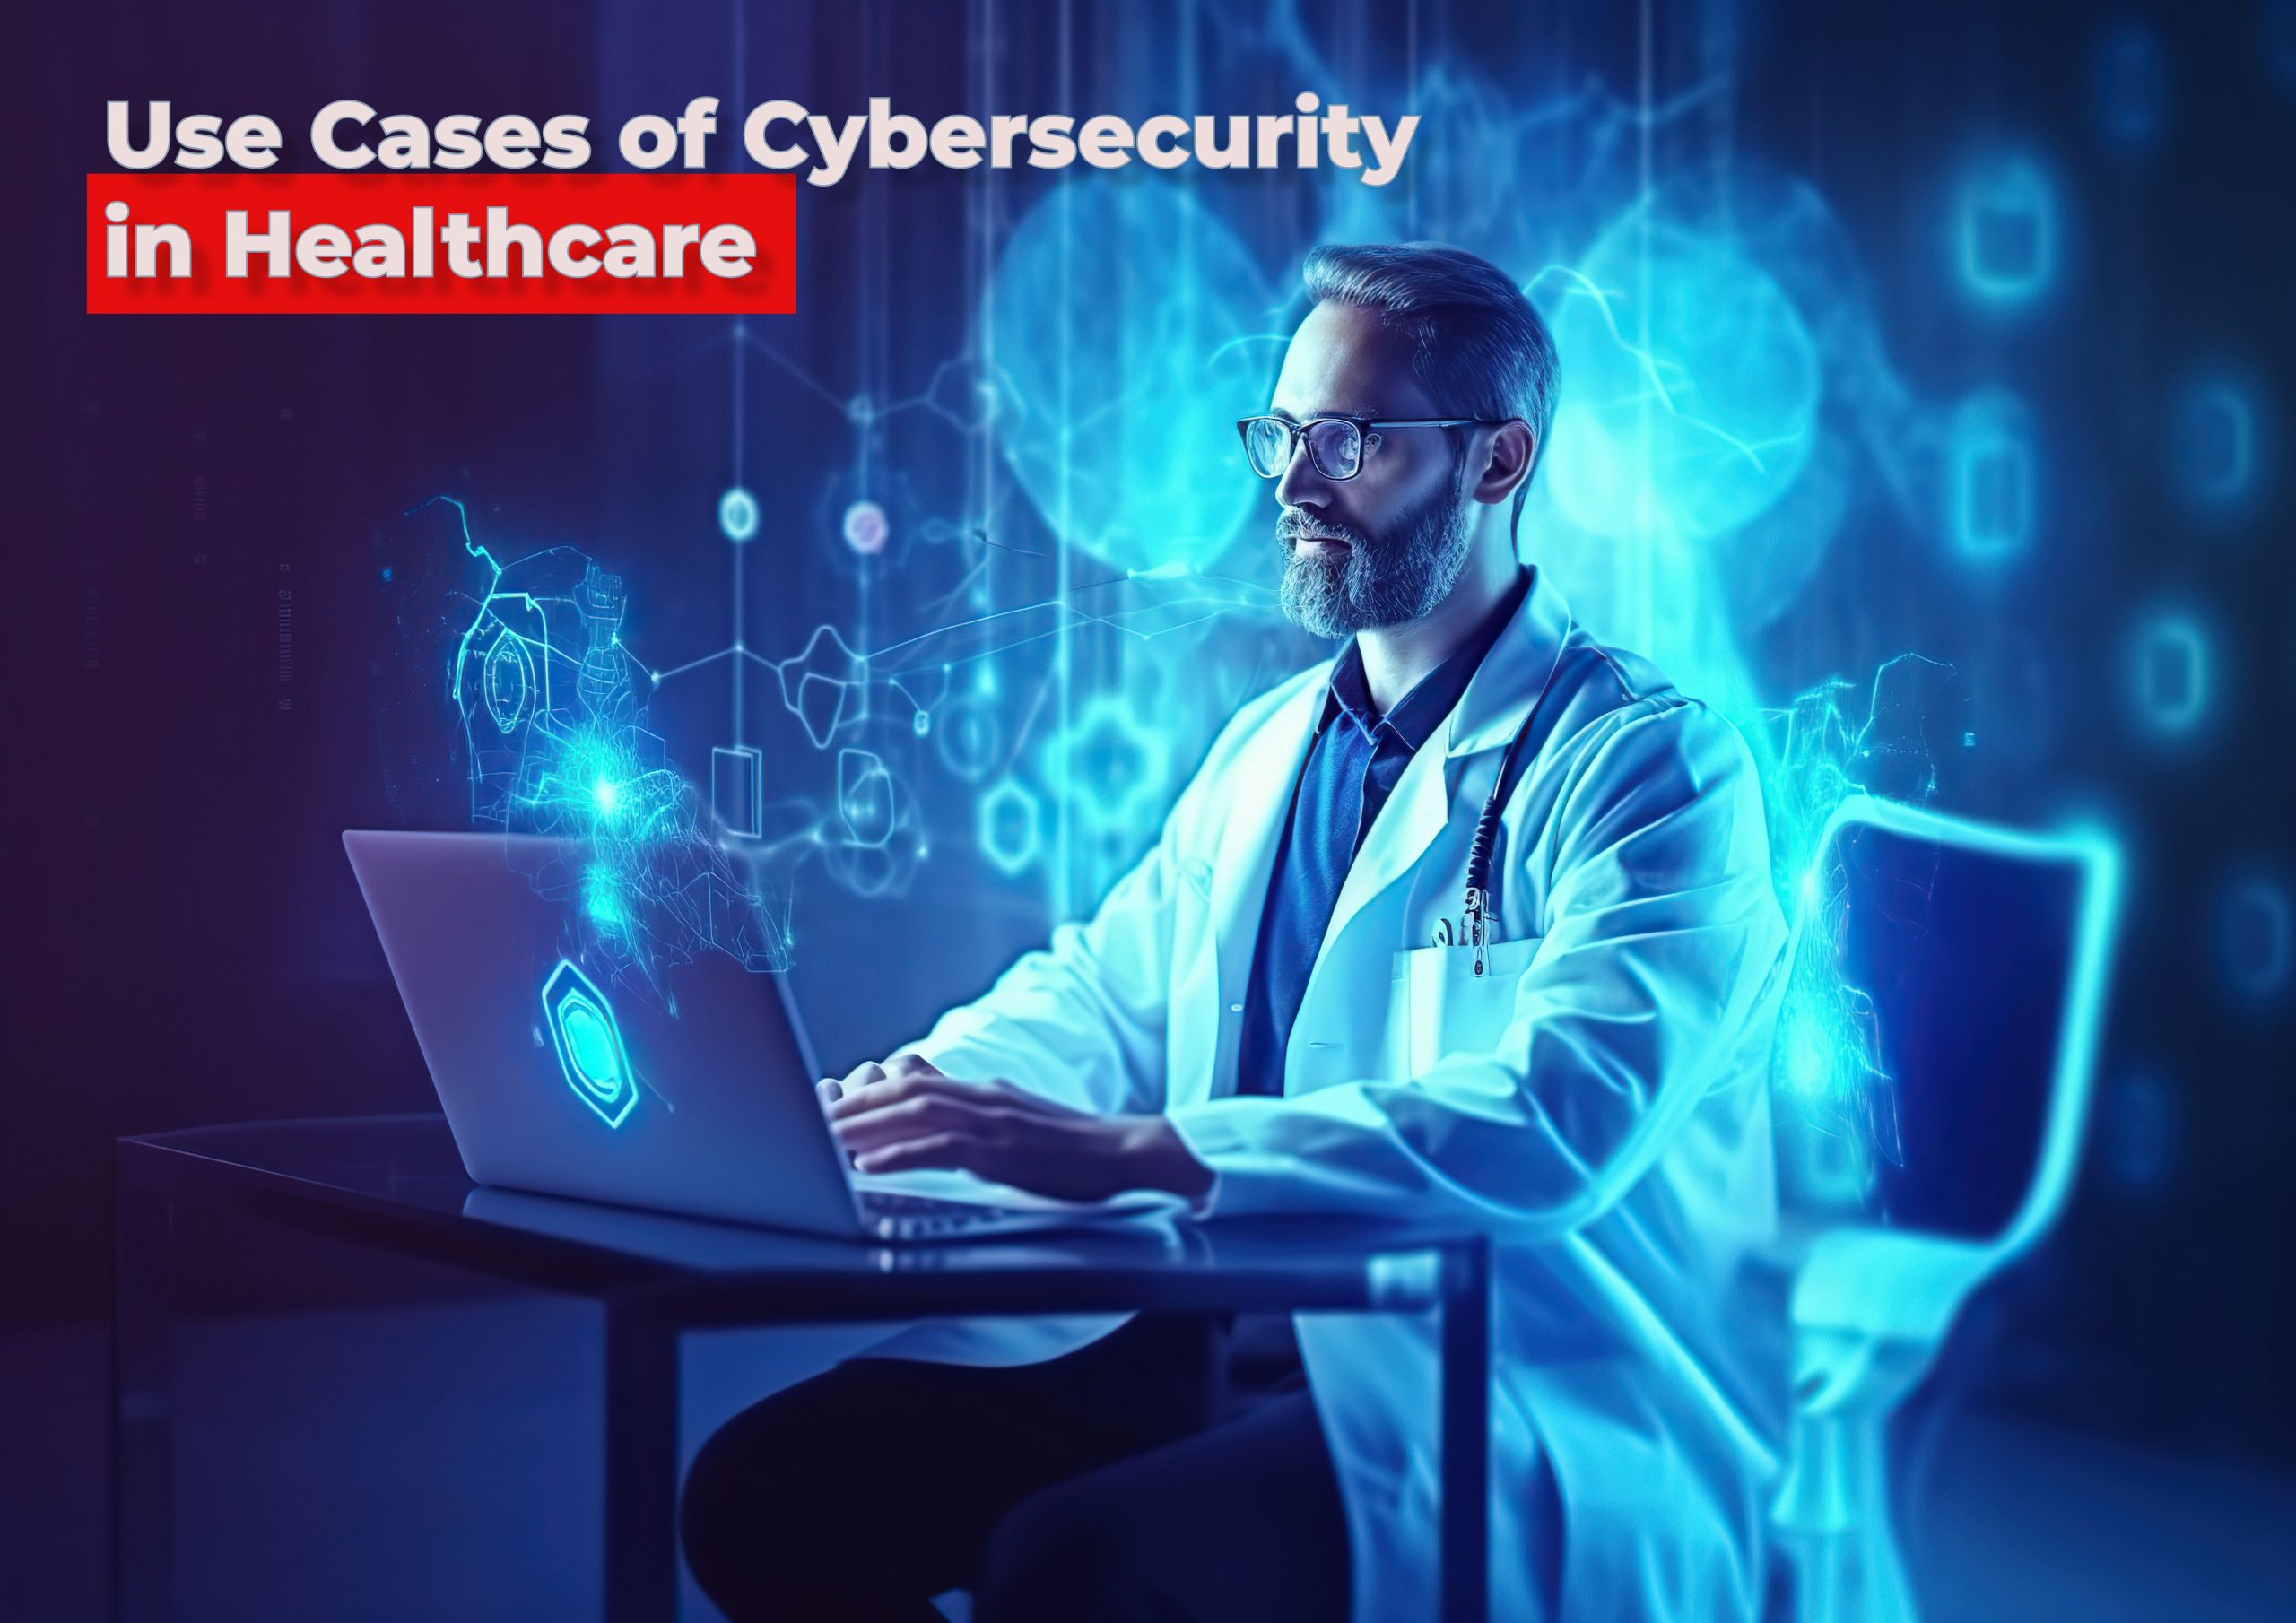 Use Cases of Cybersecurity in Healthcare